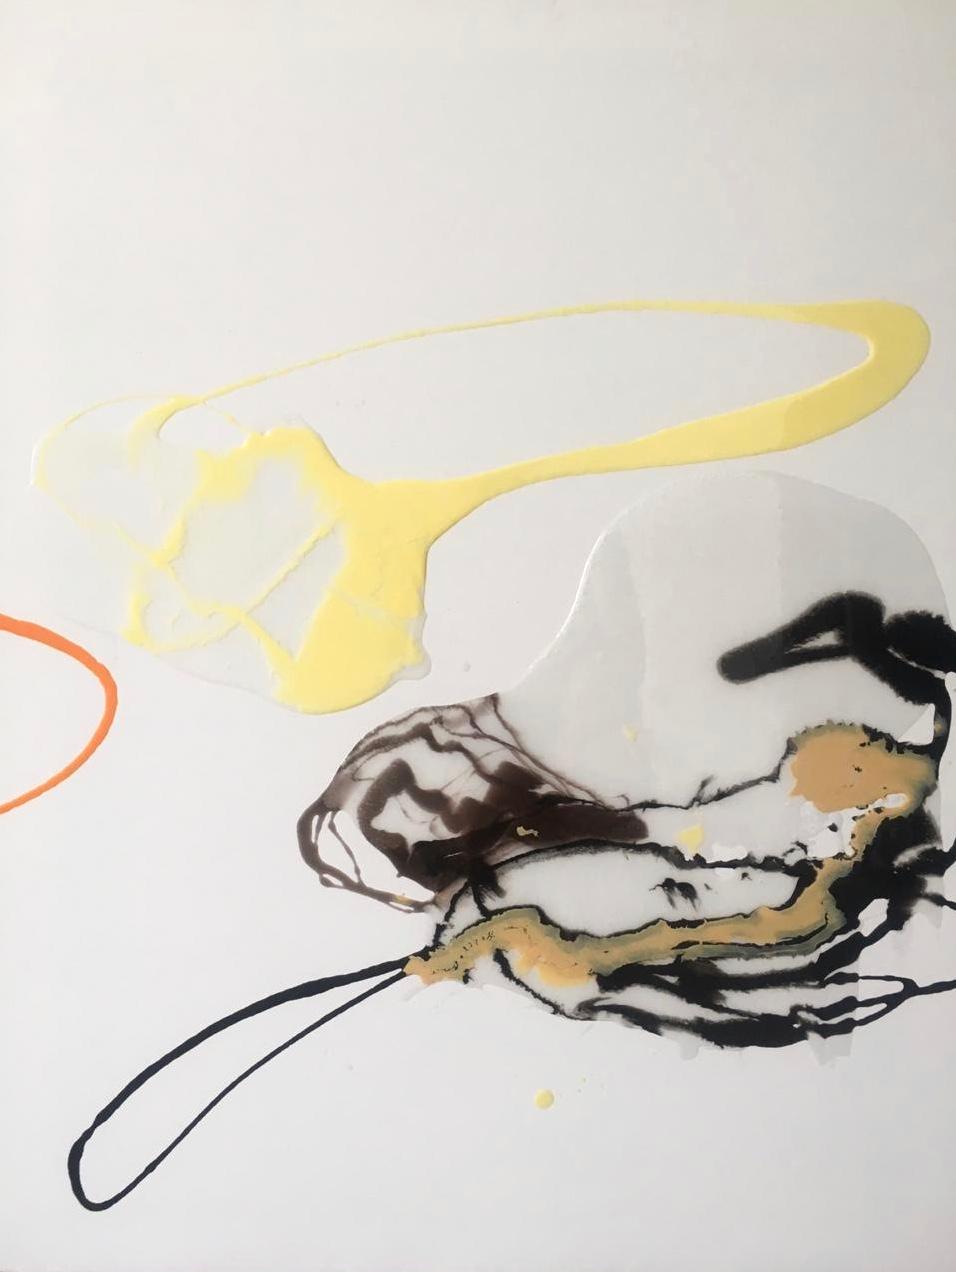 Lena Cher Abstract Drawing - Composition IV - abstraction art, made in black, orange, yellow and white